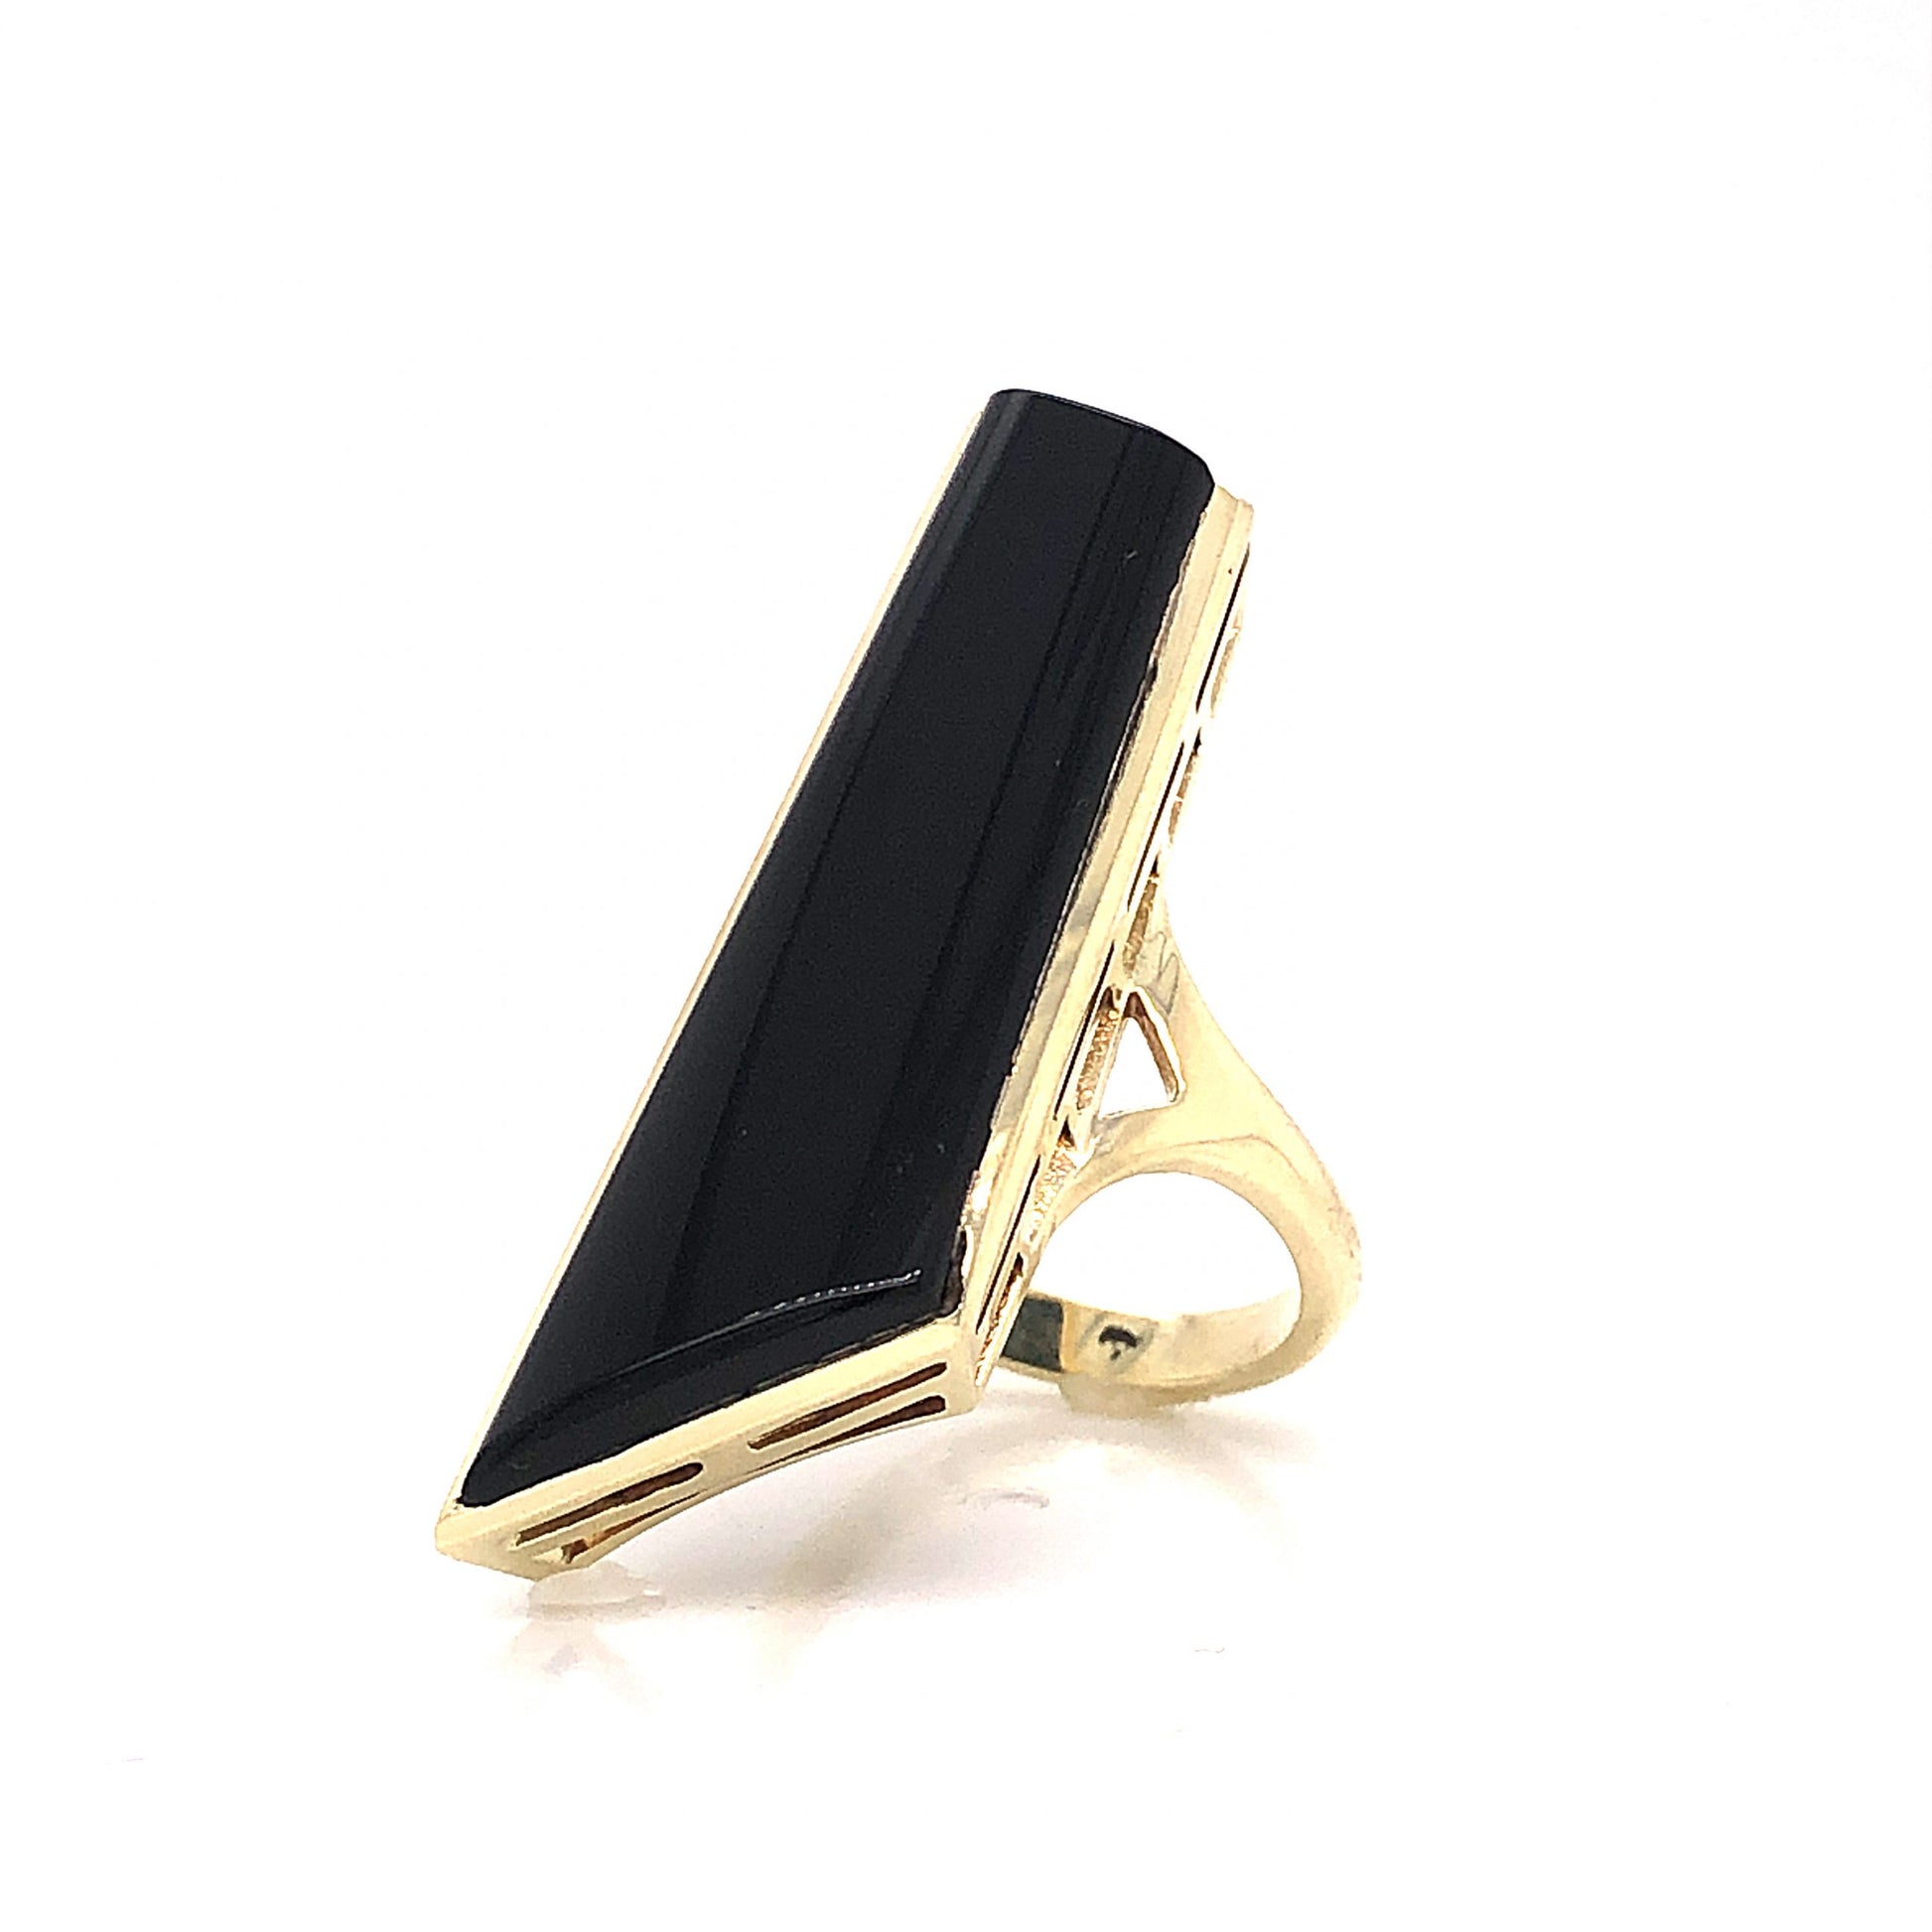 Mid-Century Onyx Shield Cocktail Ring 14k Yellow GoldComposition: 14 Karat Yellow GoldRing Size: 6.25Total Gram Weight: 9.2 gInscription: 14k